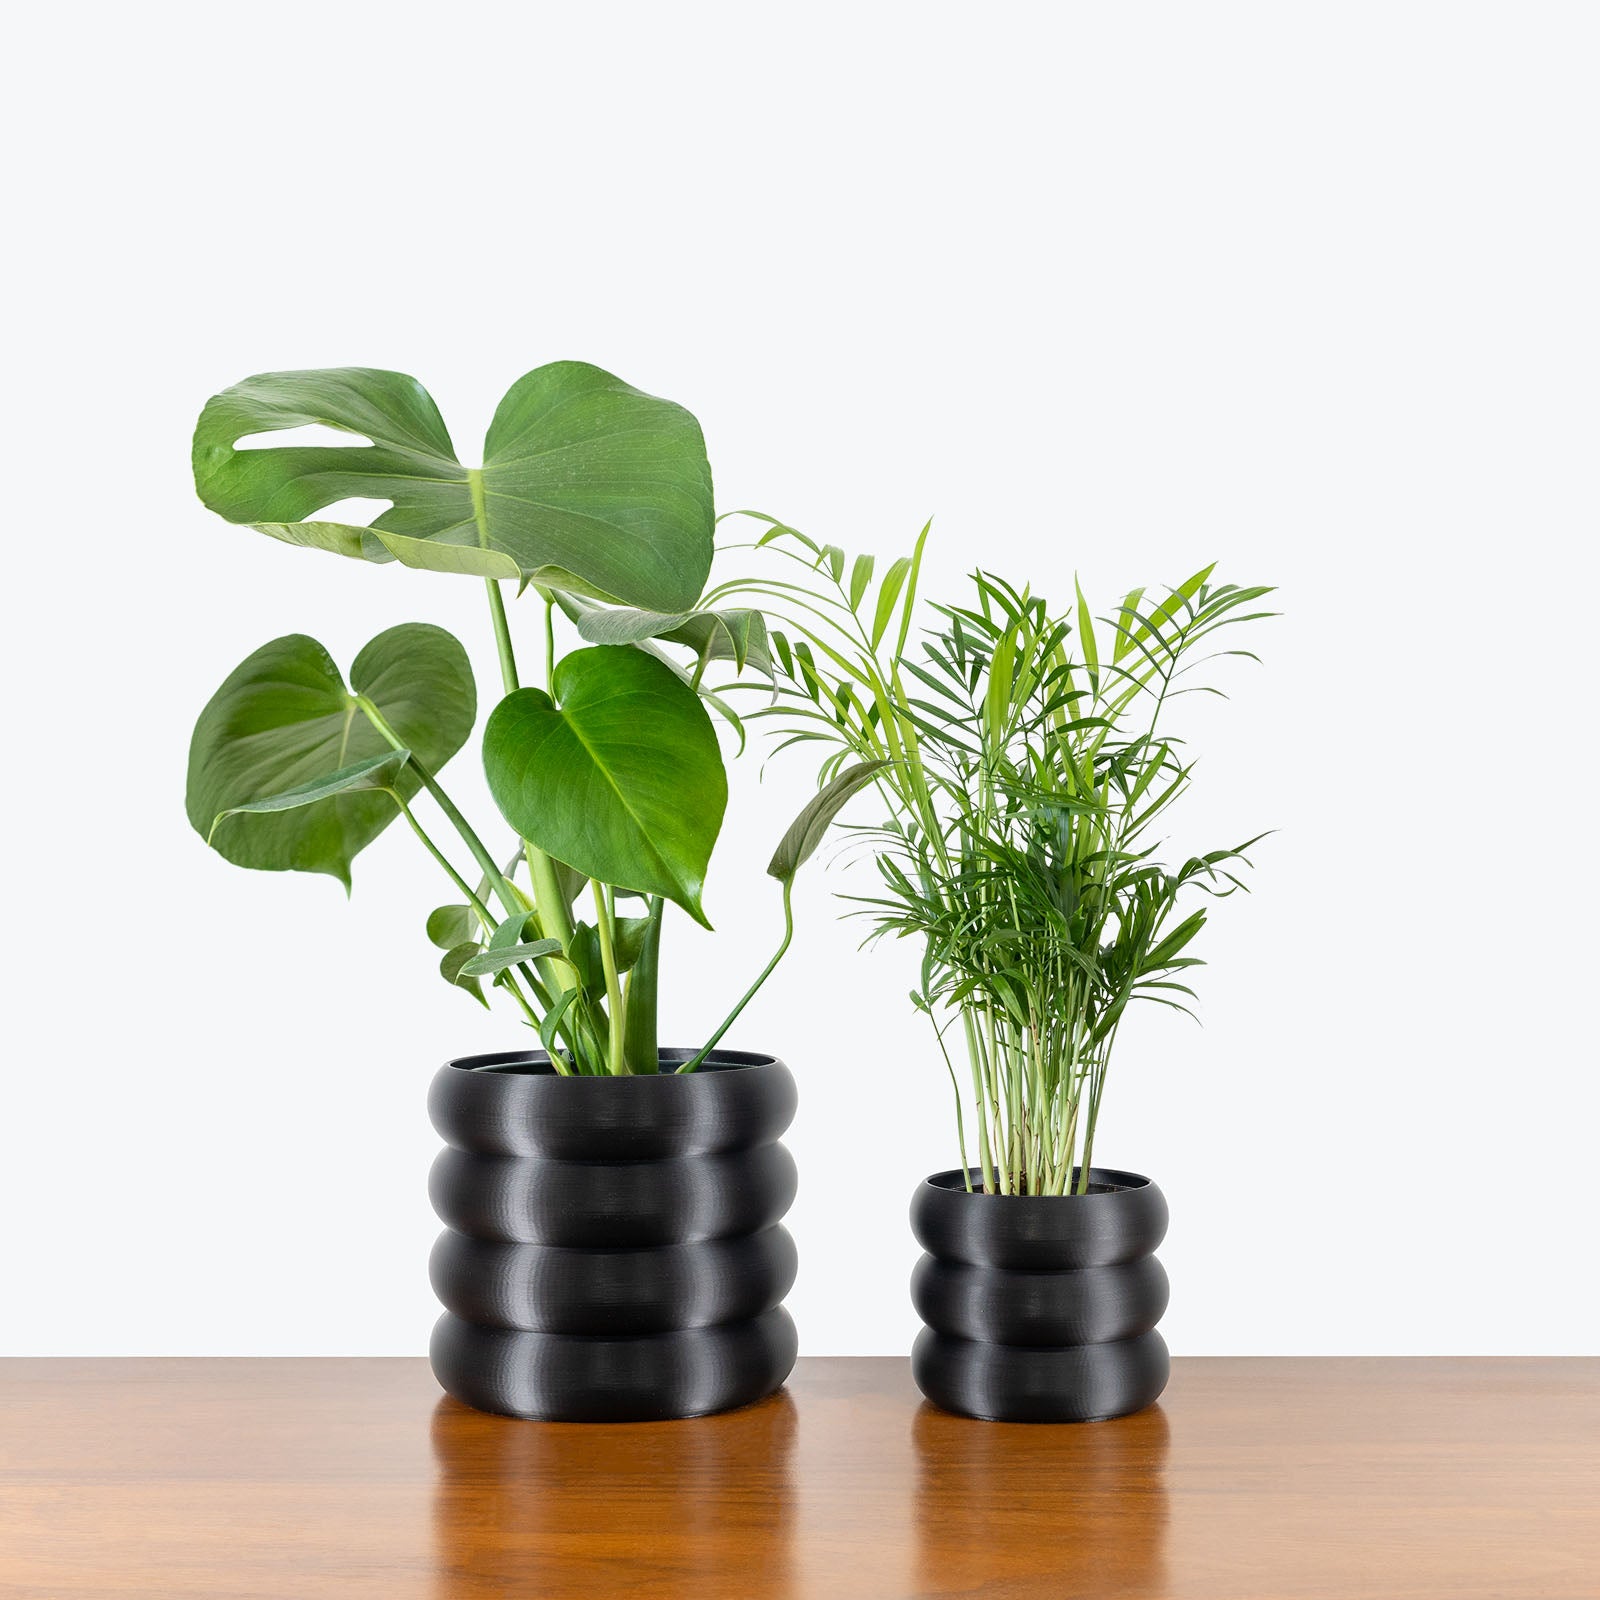 Best Selling Duo in 3D Printed Eco Friendly Donut Black Planter - House Plants Delivery Toronto - JOMO Studio #planter_donut planter